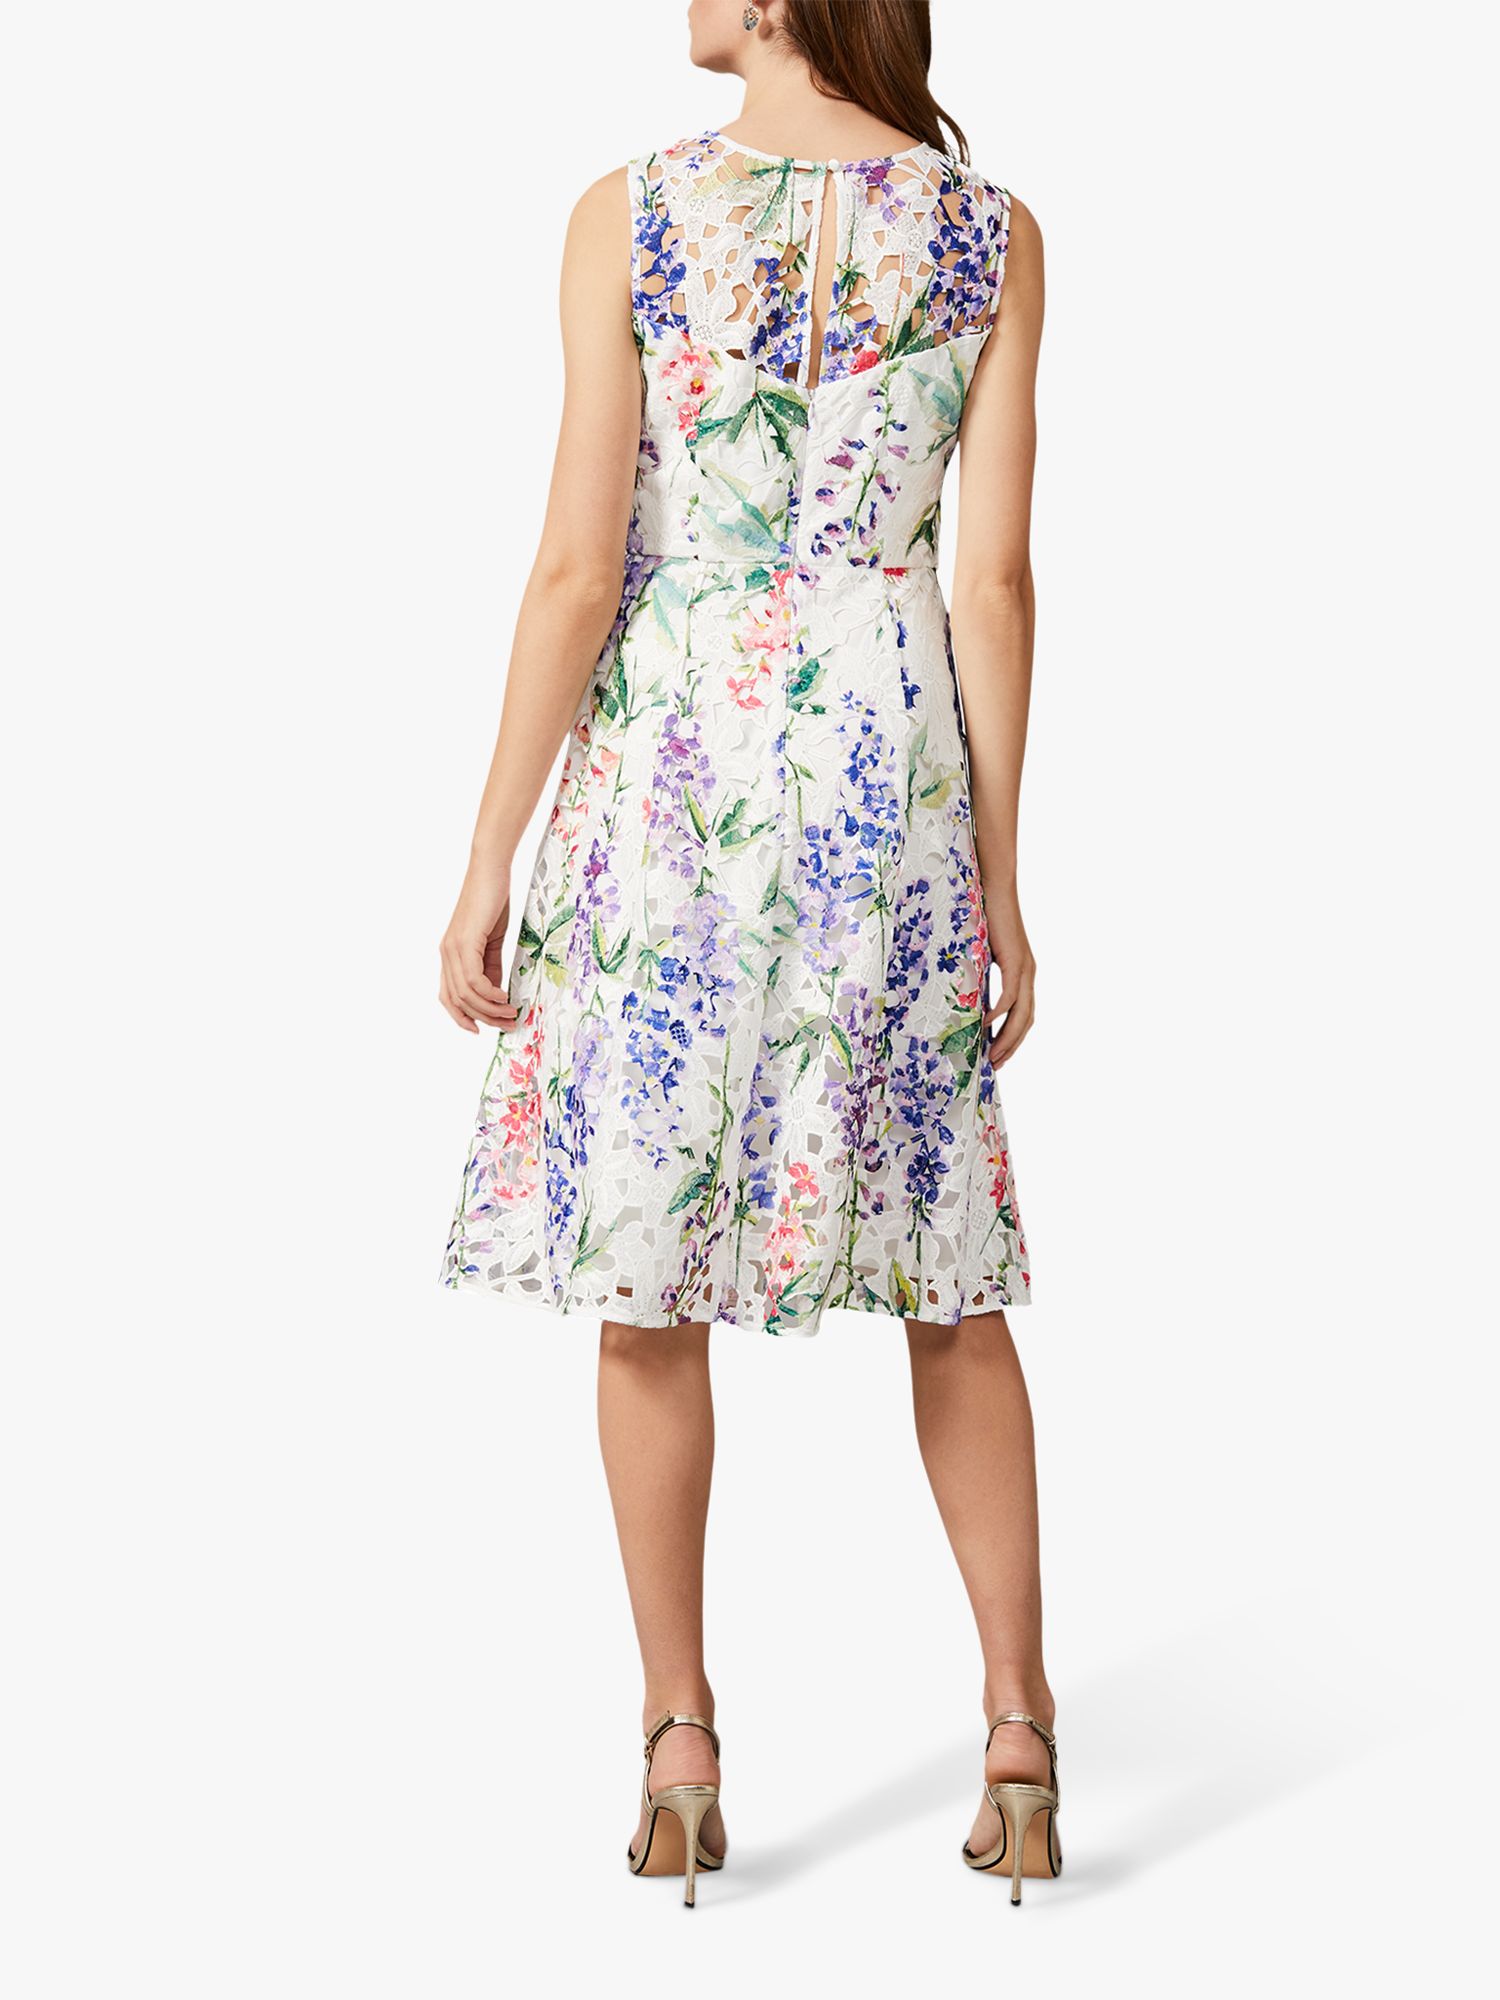 Phase Eight Lonnie Floral Dress, Ivory/Multi, 6